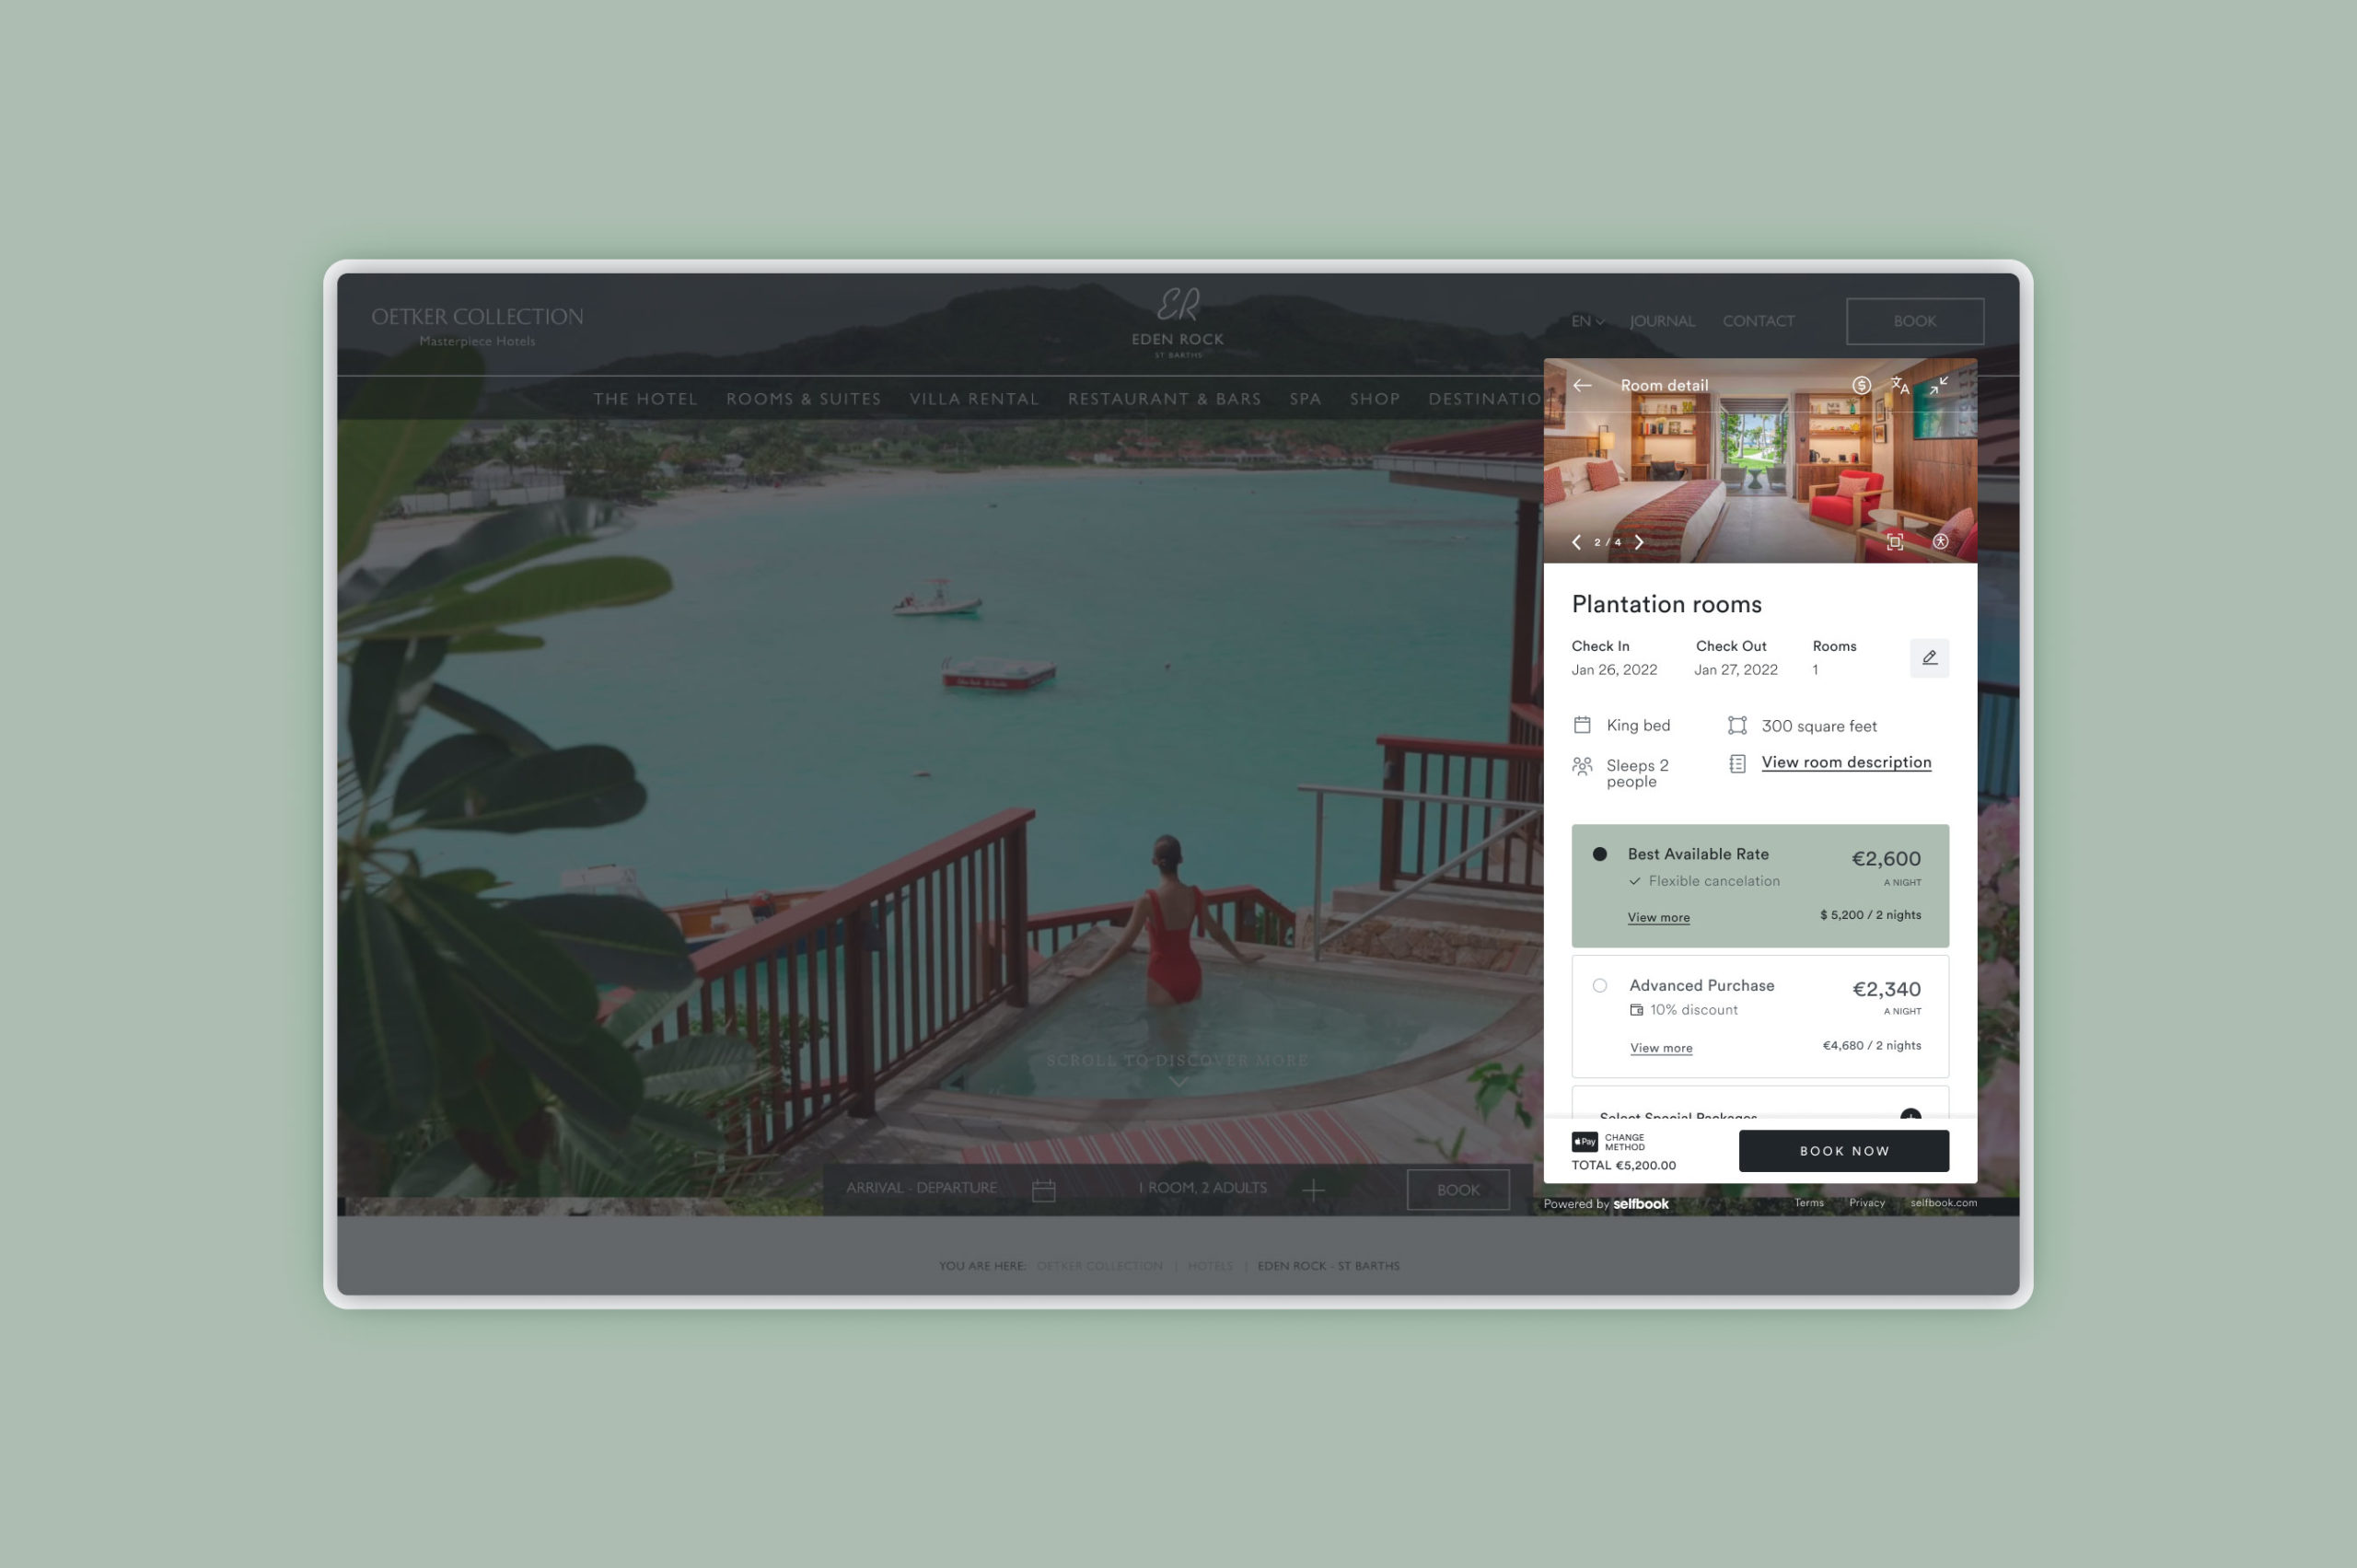 With one line of code, hotels can integrate Selfbook's transaction engine into their websites